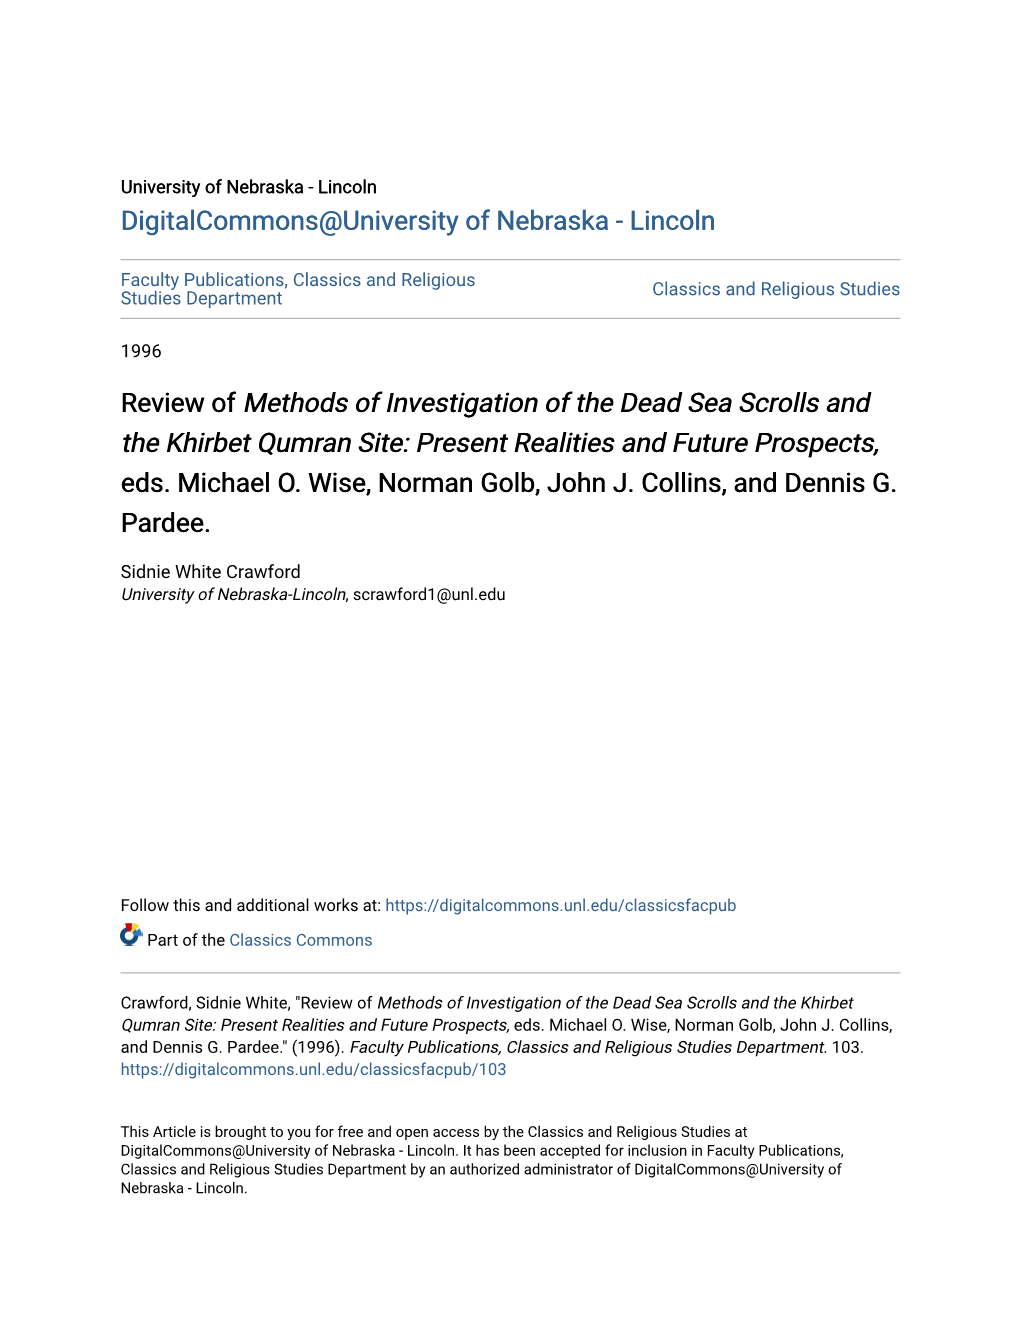 Review of Methods of Investigation of the Dead Sea Scrolls and the Khirbet Qumran Site: Present Realities and Future Prospects, Eds